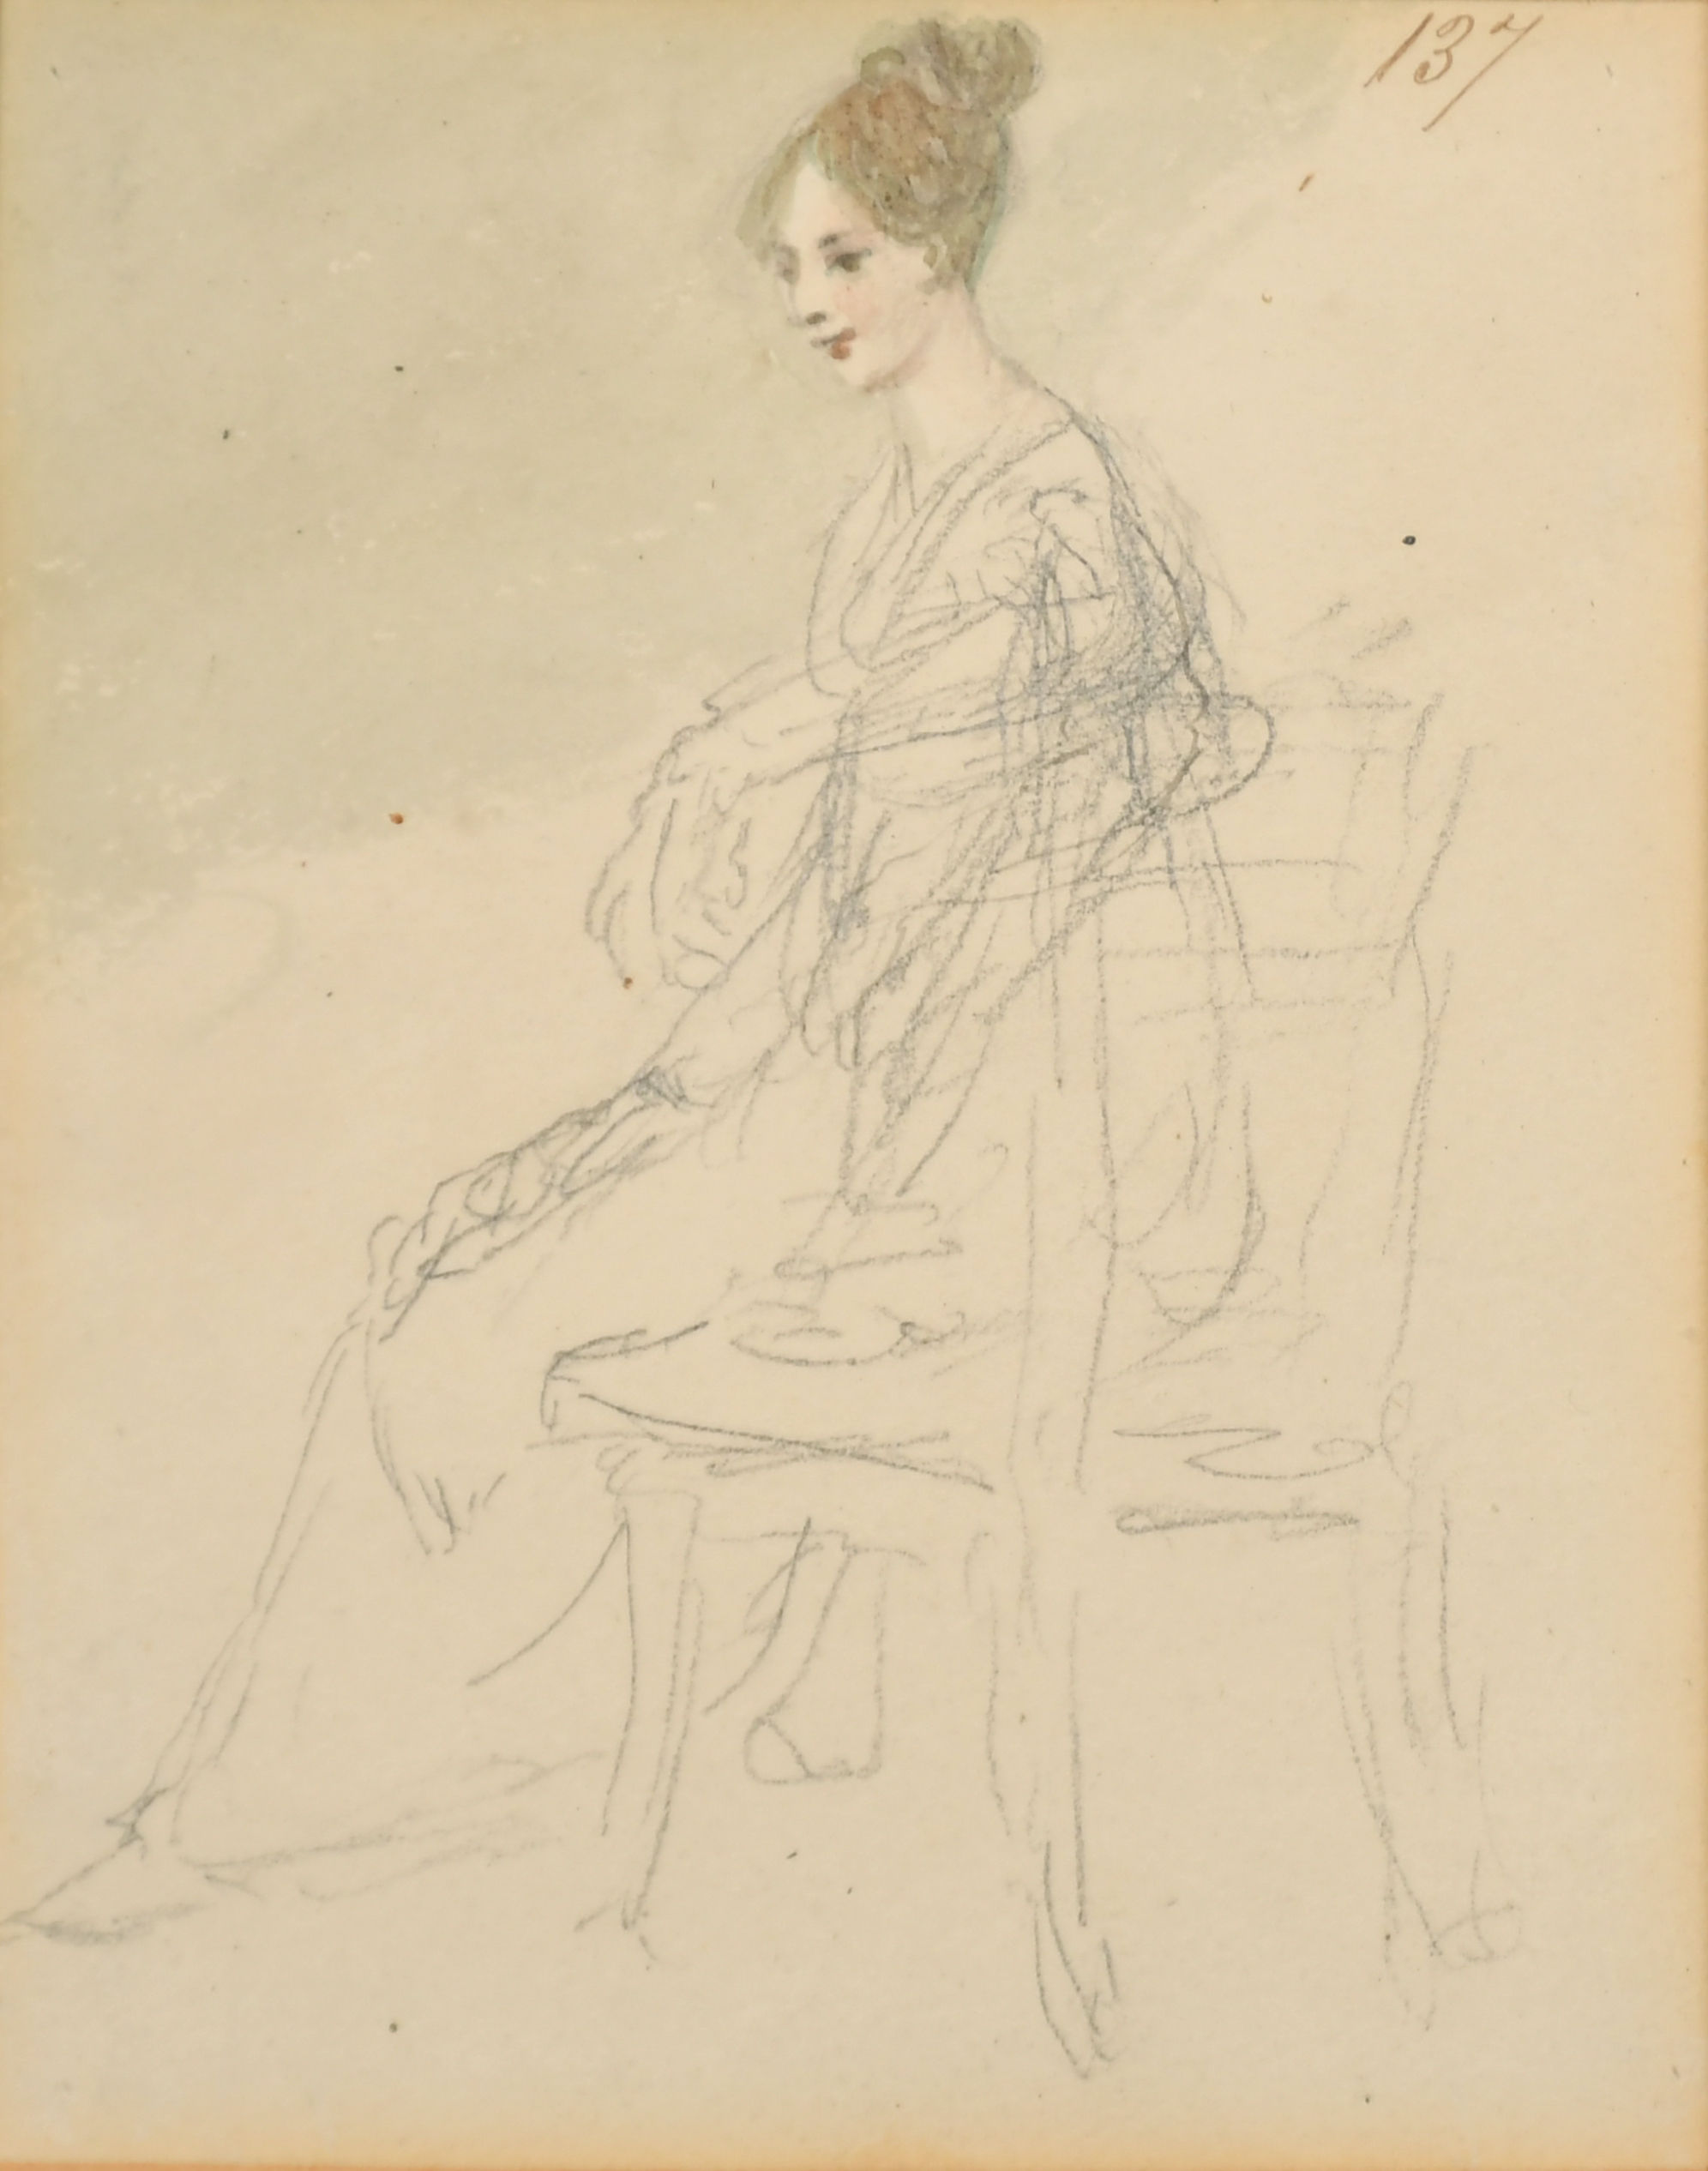 John Nixon (1750-1818) British. A Full Length Portrait of a Lady, Pencil, Numbered 189, 6.5" x 4.25" - Image 3 of 7